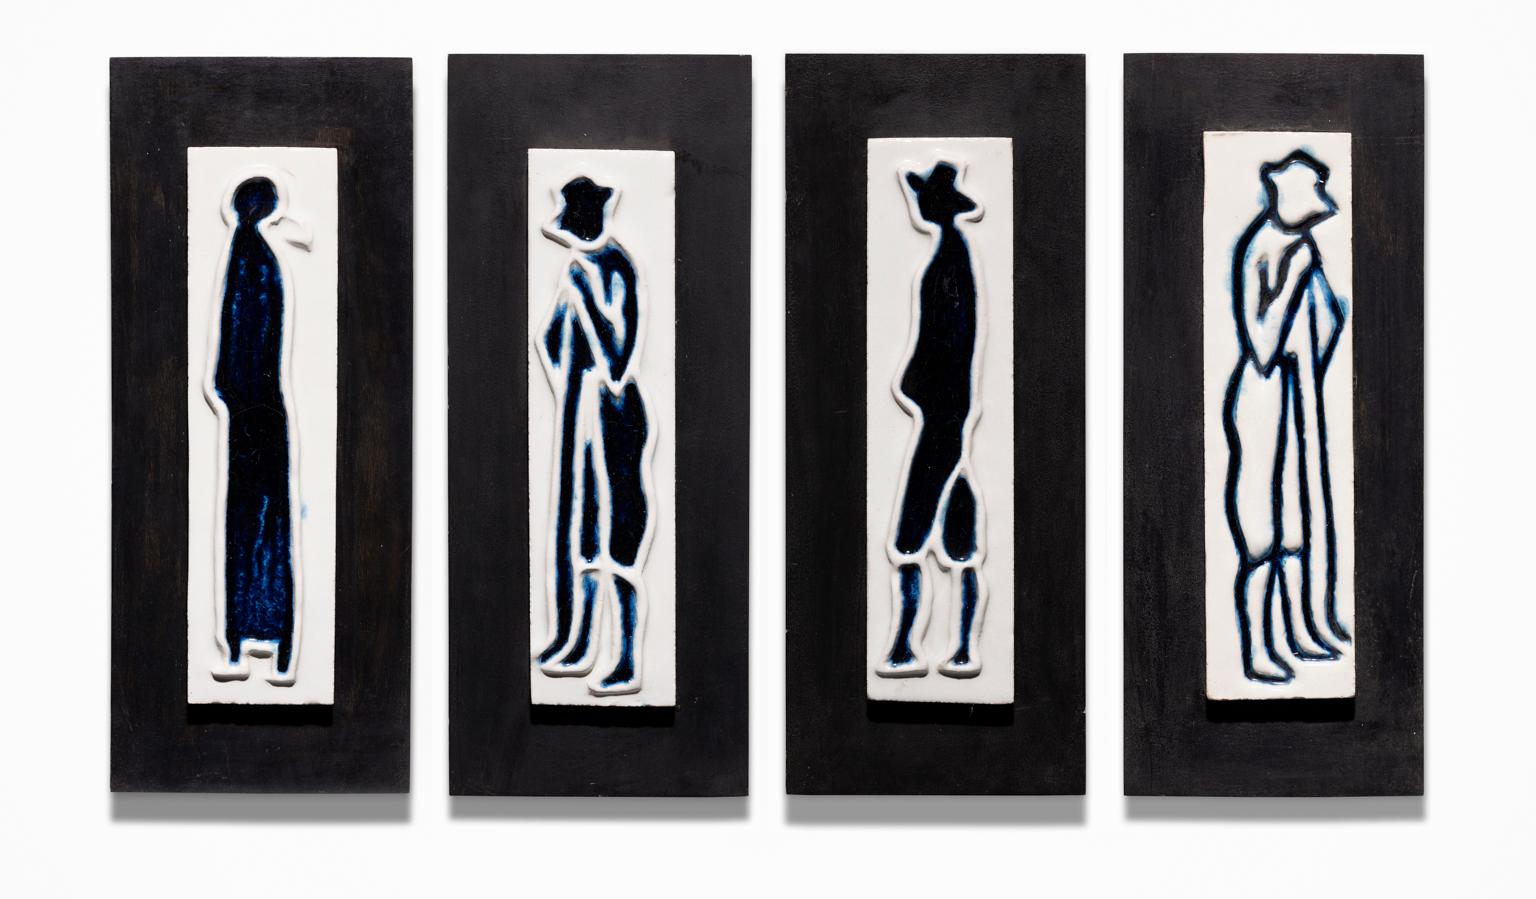 These four ceramic plaques on wood are an exquisite set piece from the Italian artist Umberto Del Negro. Its title "Prove" is Italian for "Evidence". One interpretation is that it refers to evidence of existence, as the four figures appear to be